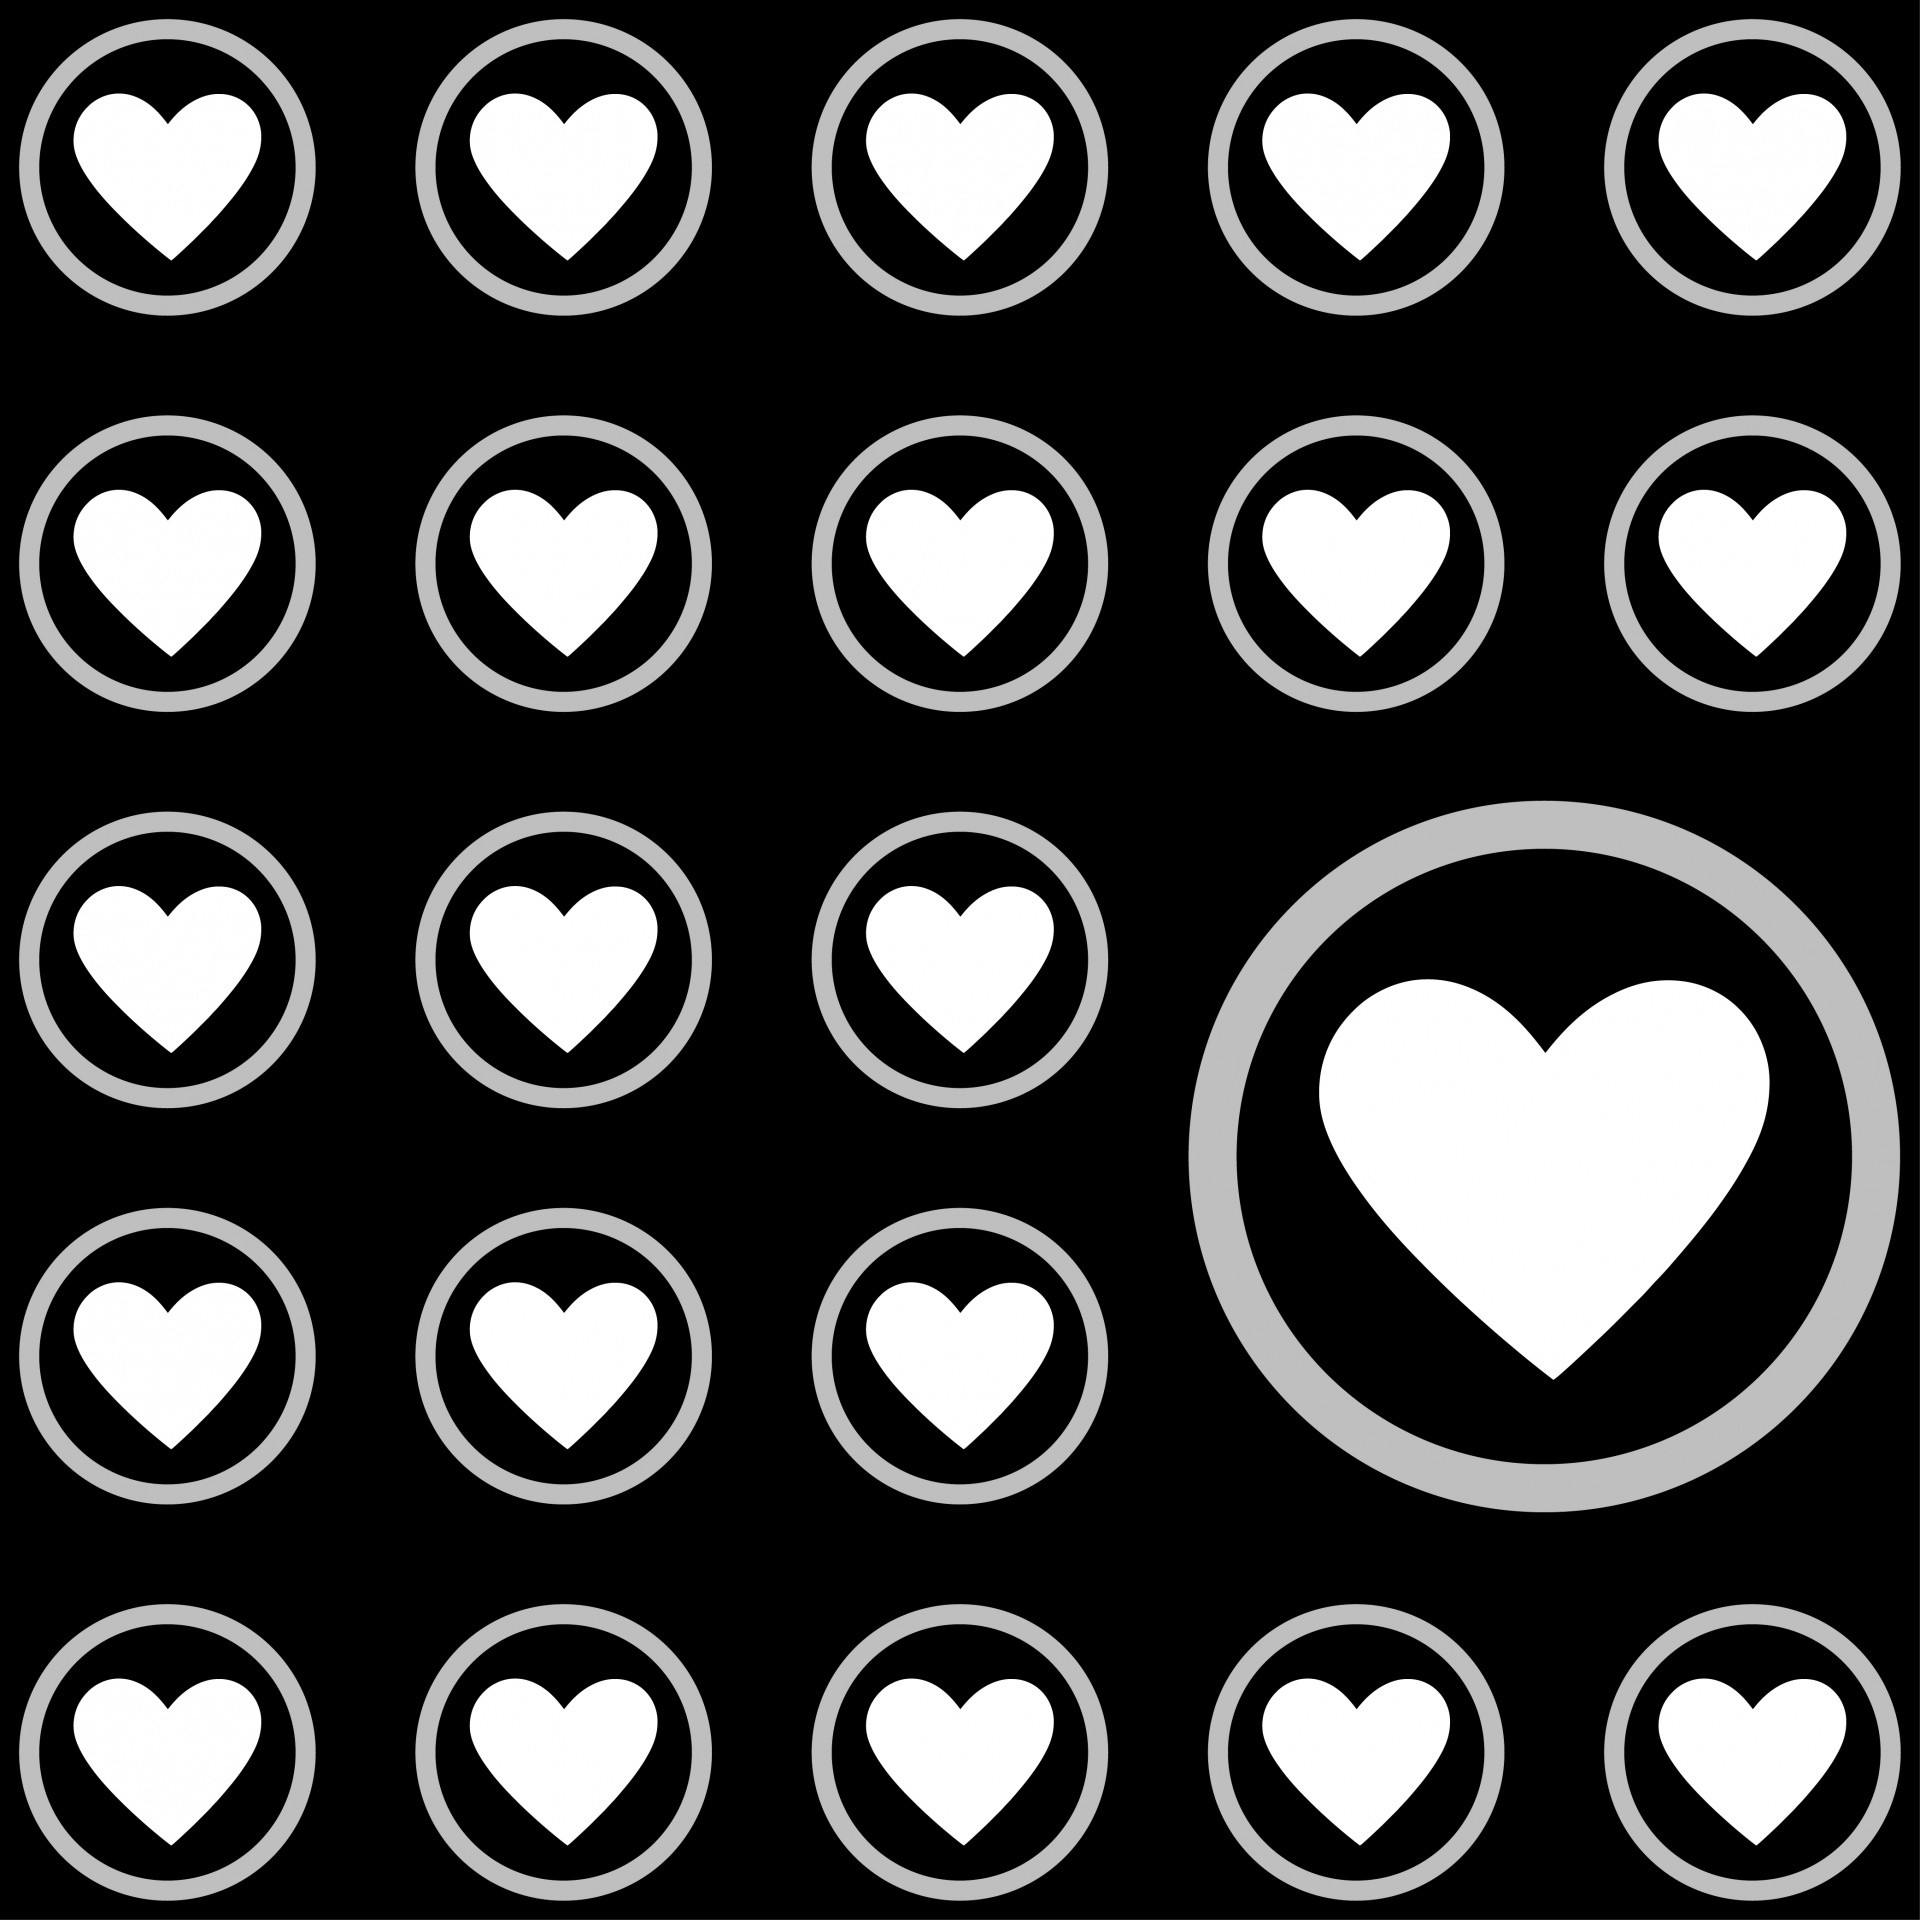 Black And White Hearts Background (28+ Pictures)